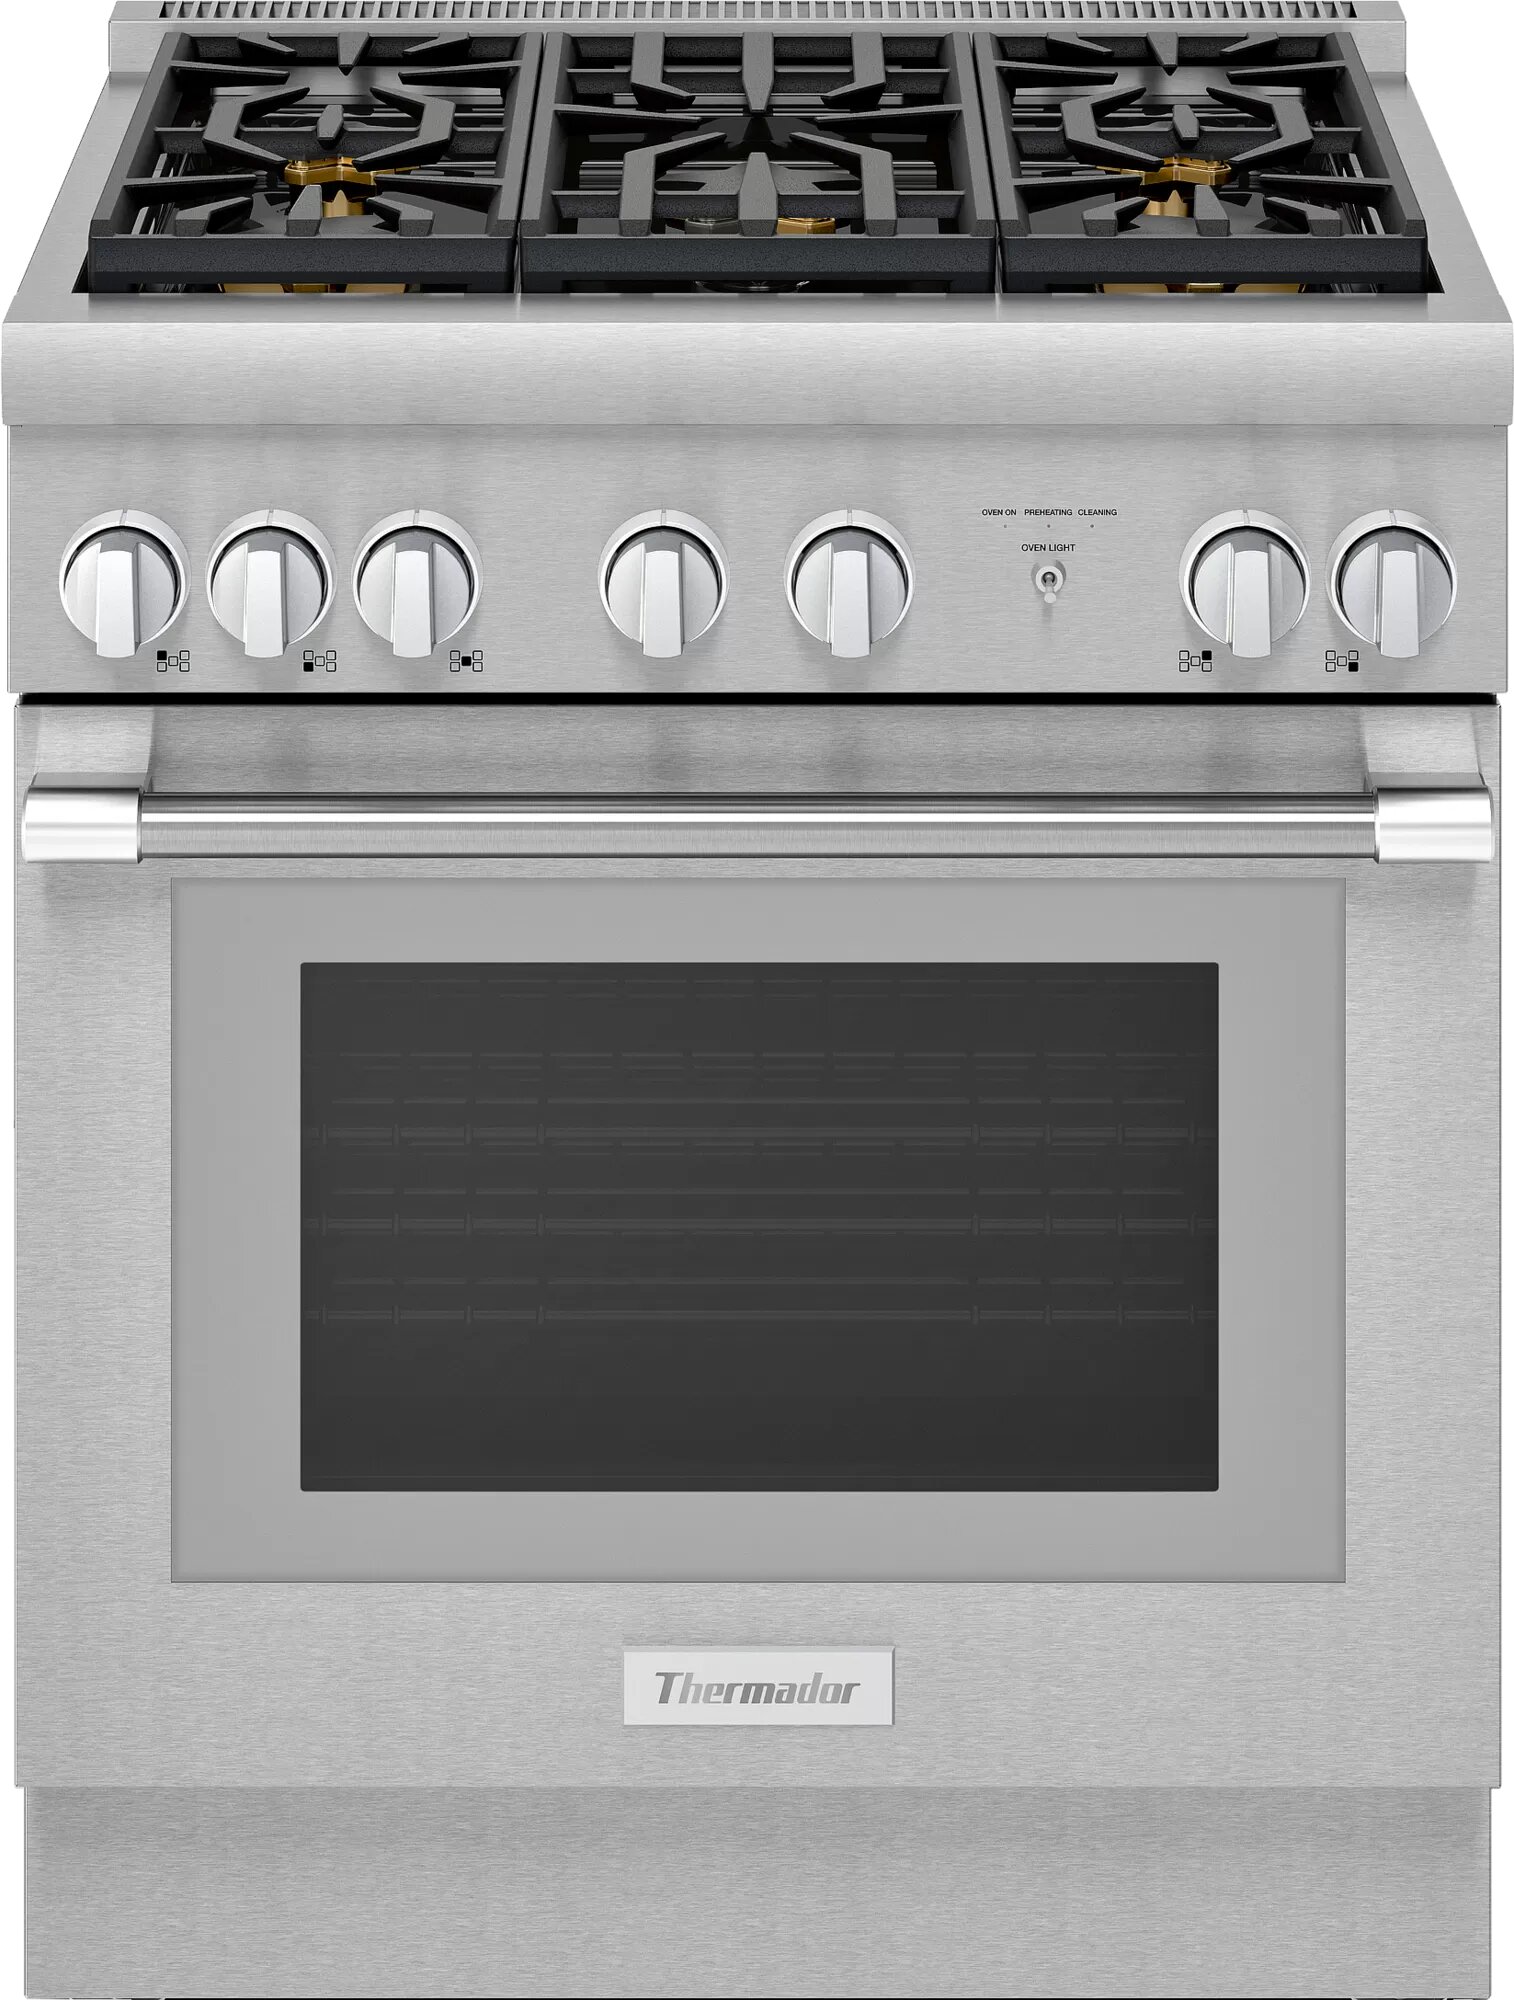 Thermador Dual Fuel Freestanding Range, 30″/76 cm, Pro Harmony Professional Series, Stainless Steel